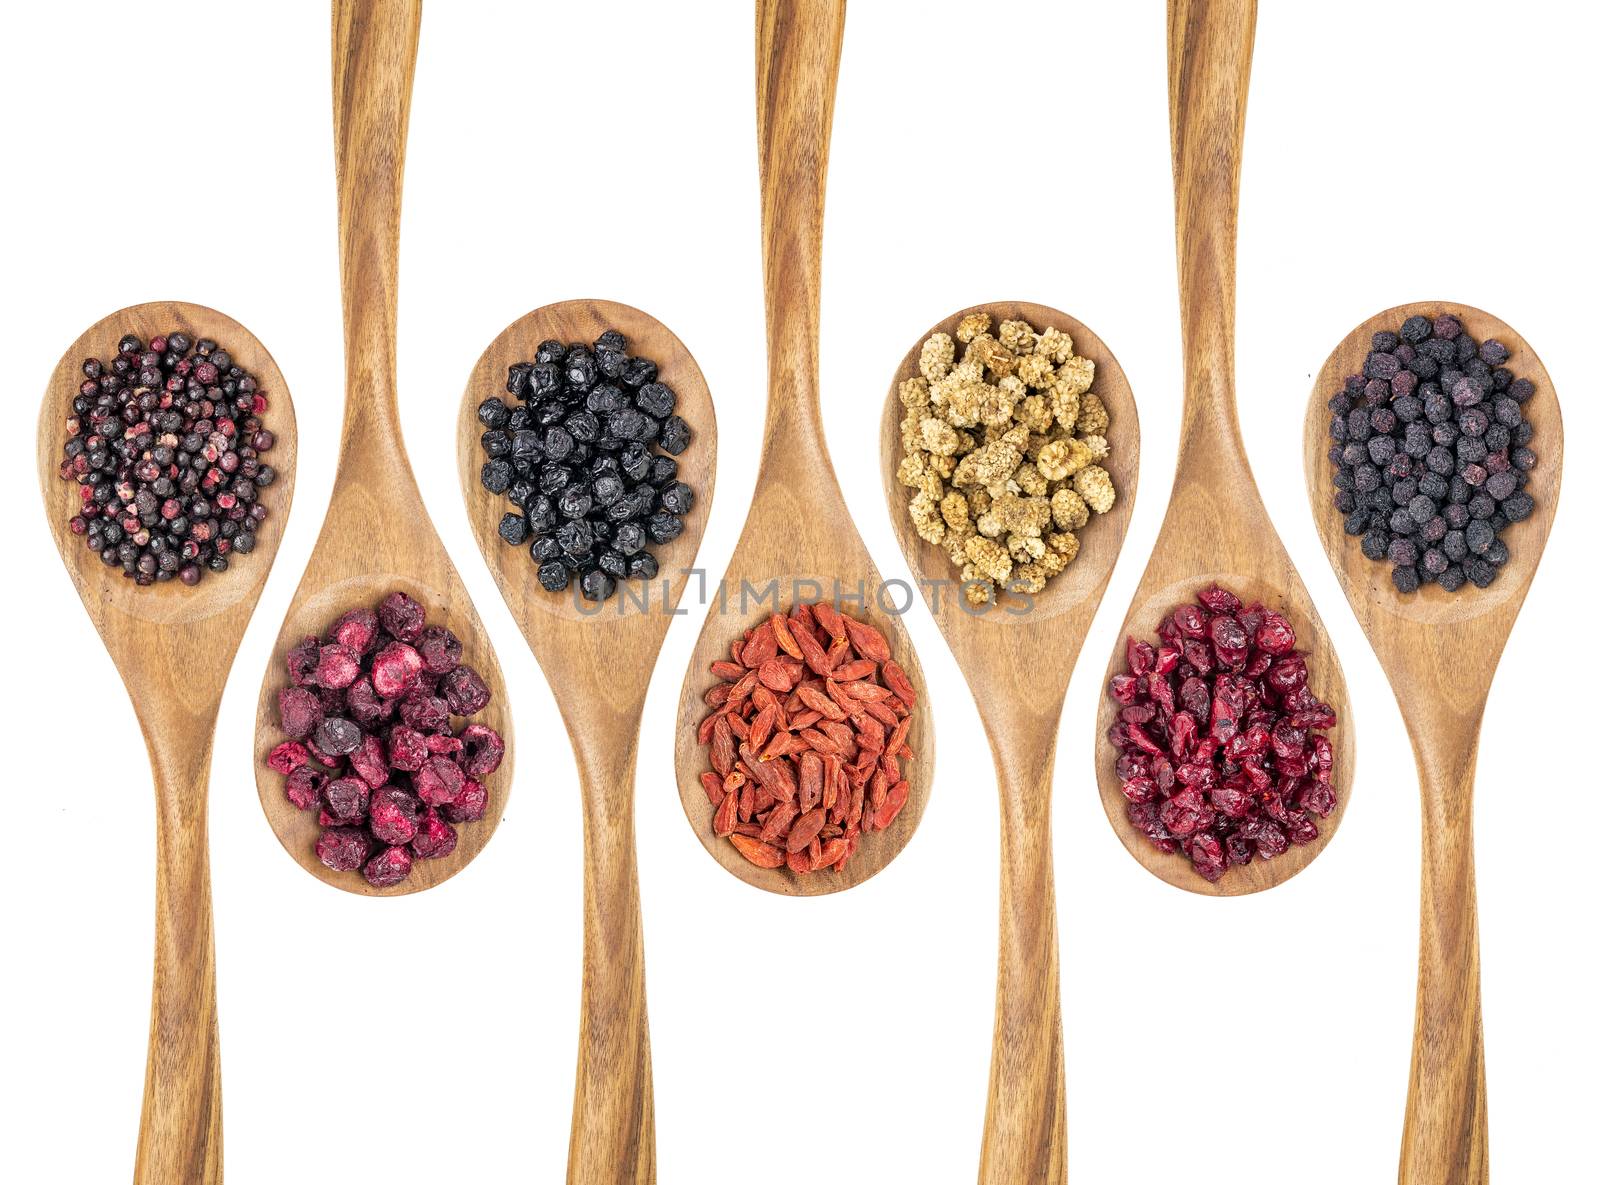 healthy dried berry collection (blueberry, mulberry, cherry, goji, elderberry, chokeberry, cranberry) on isolated wooden spoons, top view